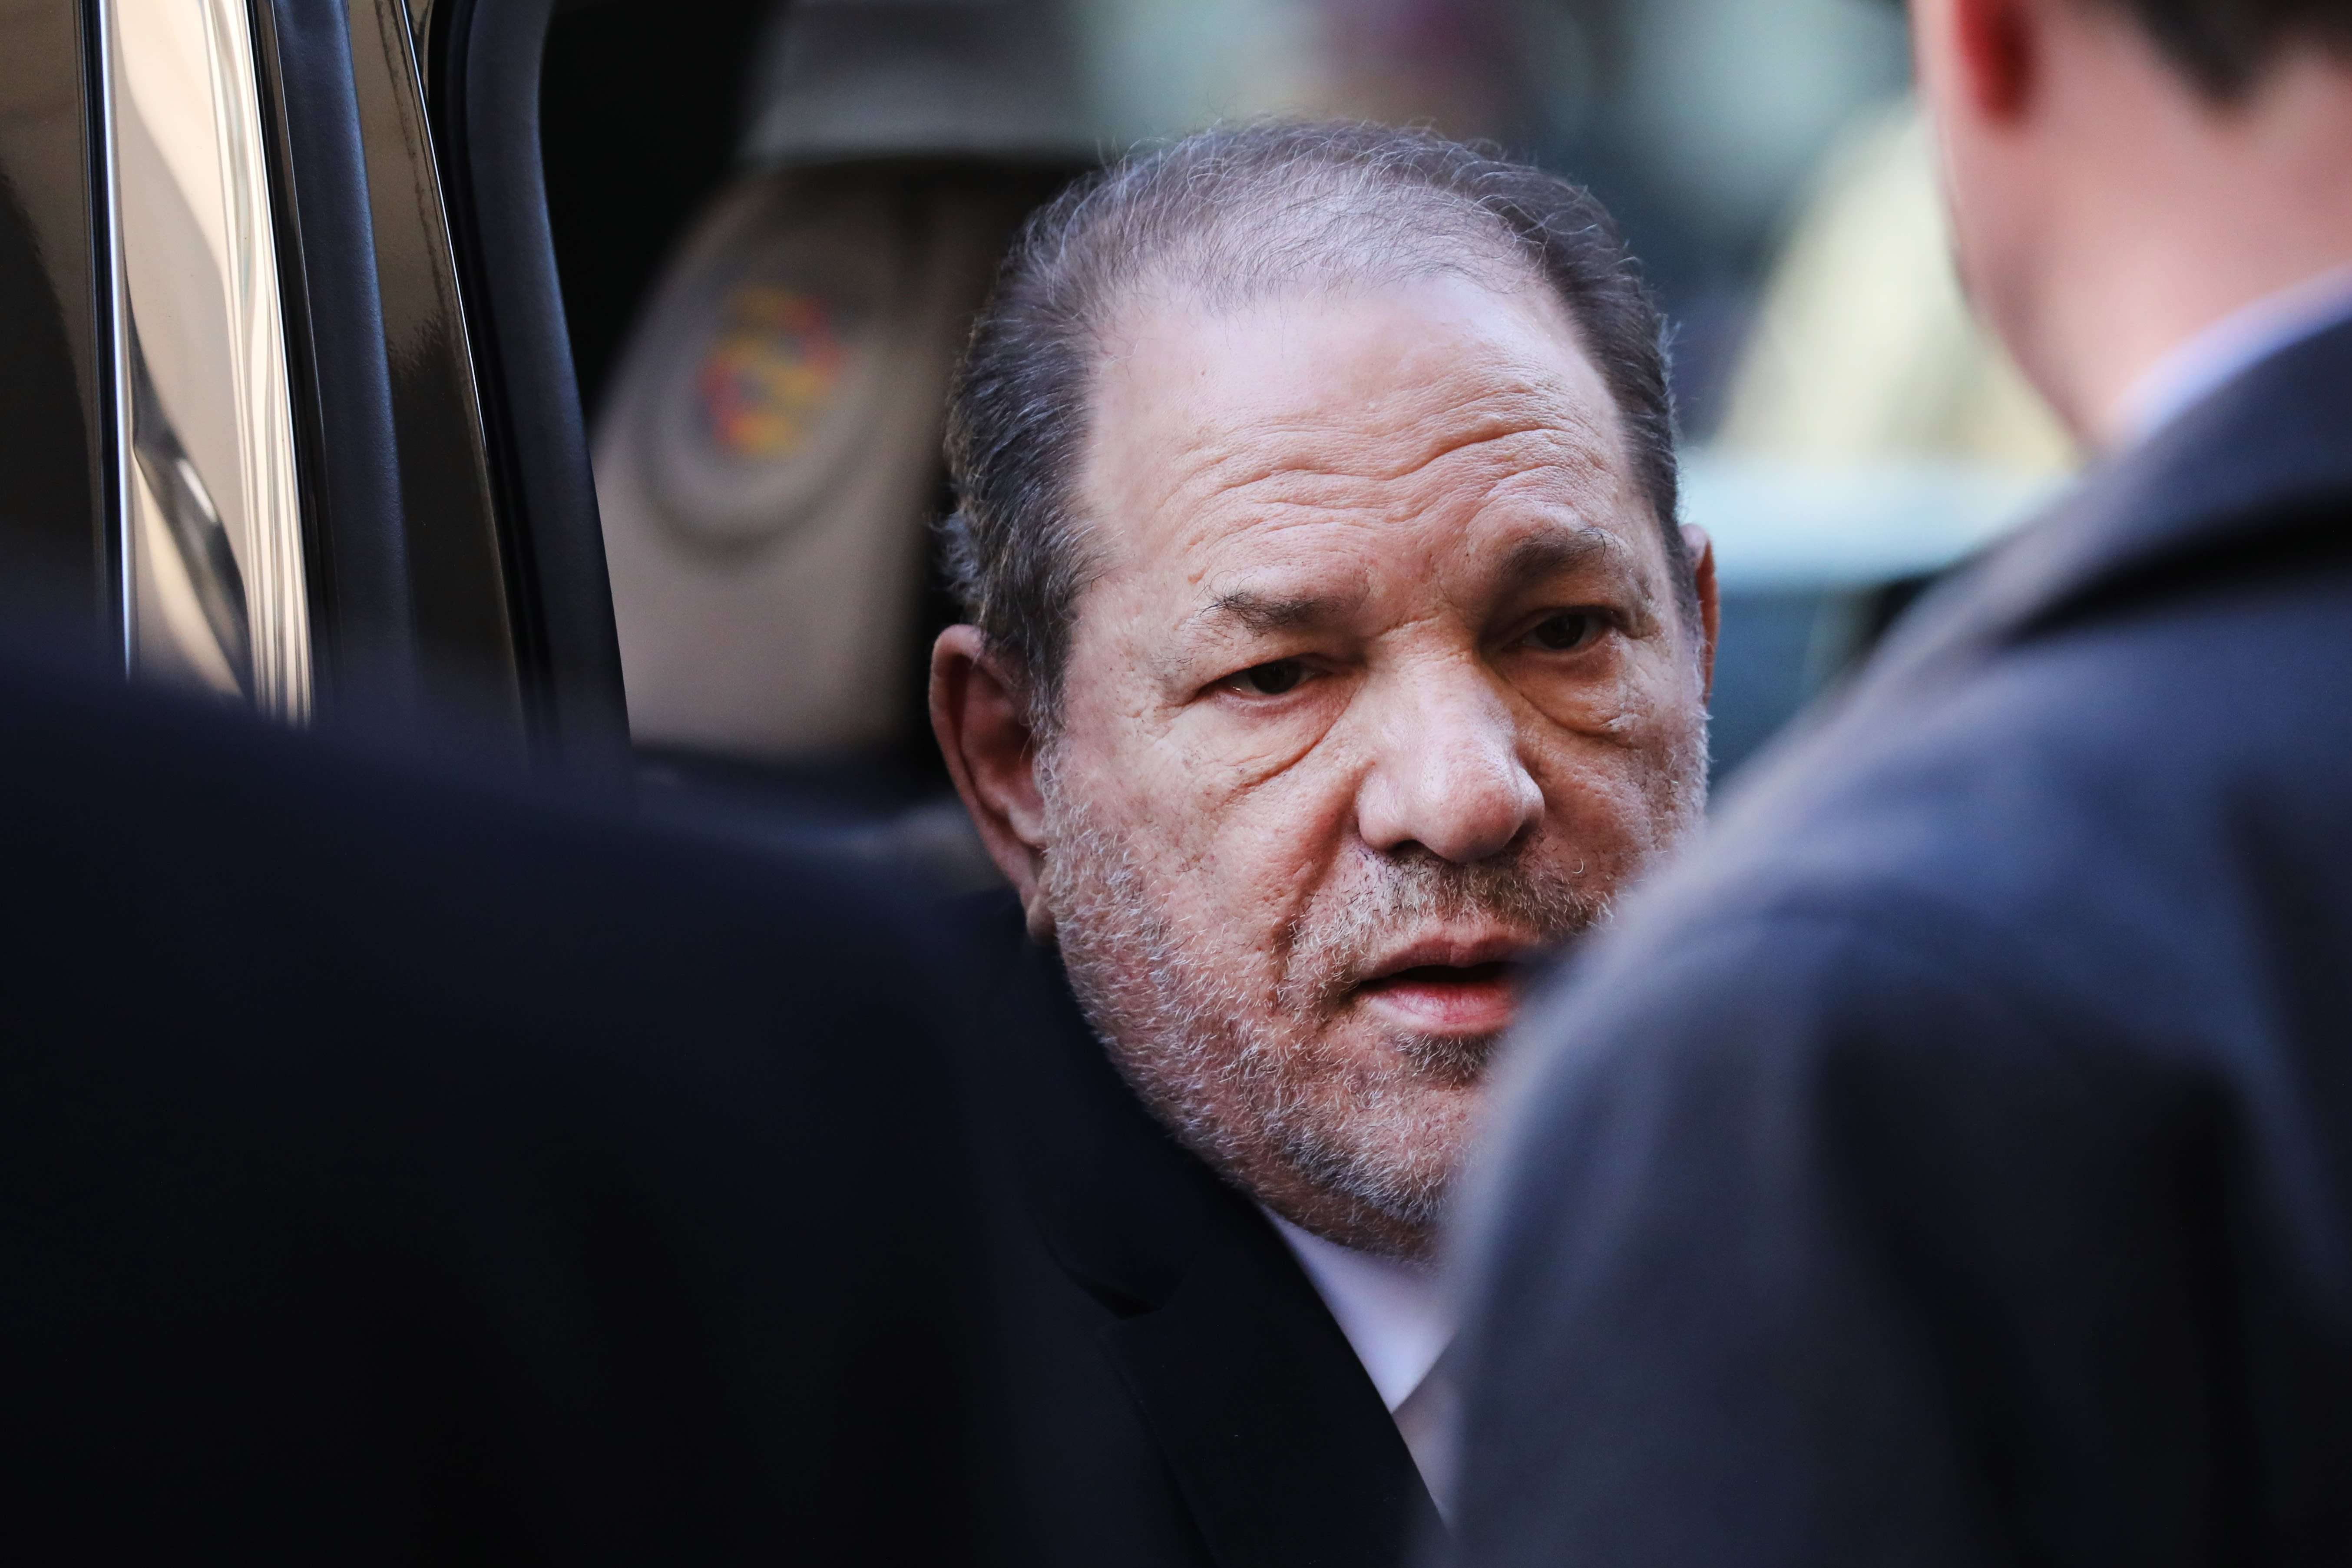 image for Harvey Weinstein sentenced to 23 years in prison for rape and sex assault in case that sparked 'MeToo' movement